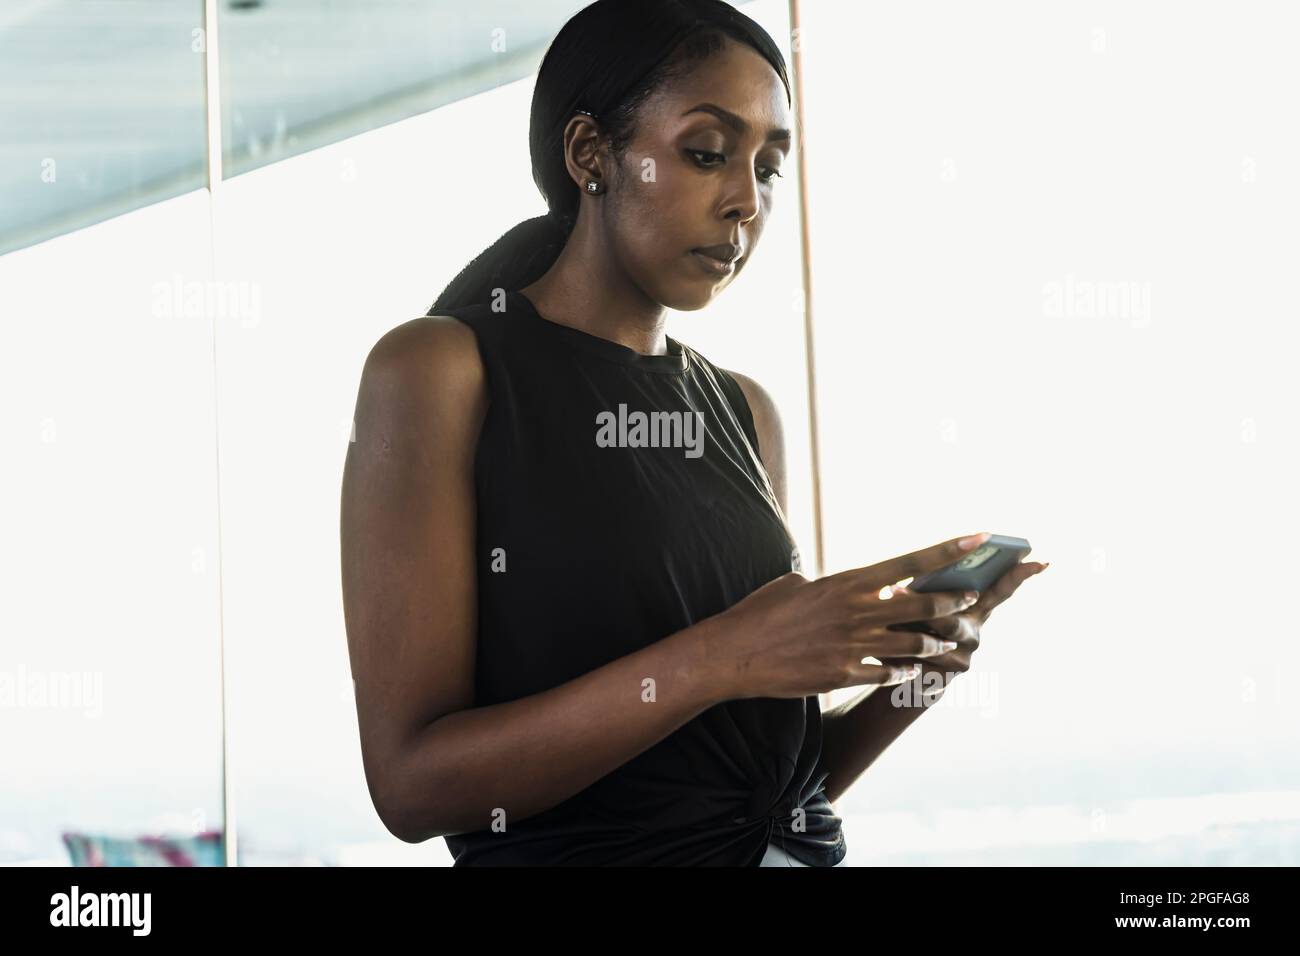 Athletic black woman using her mobile phone outdoors. Stock Photo